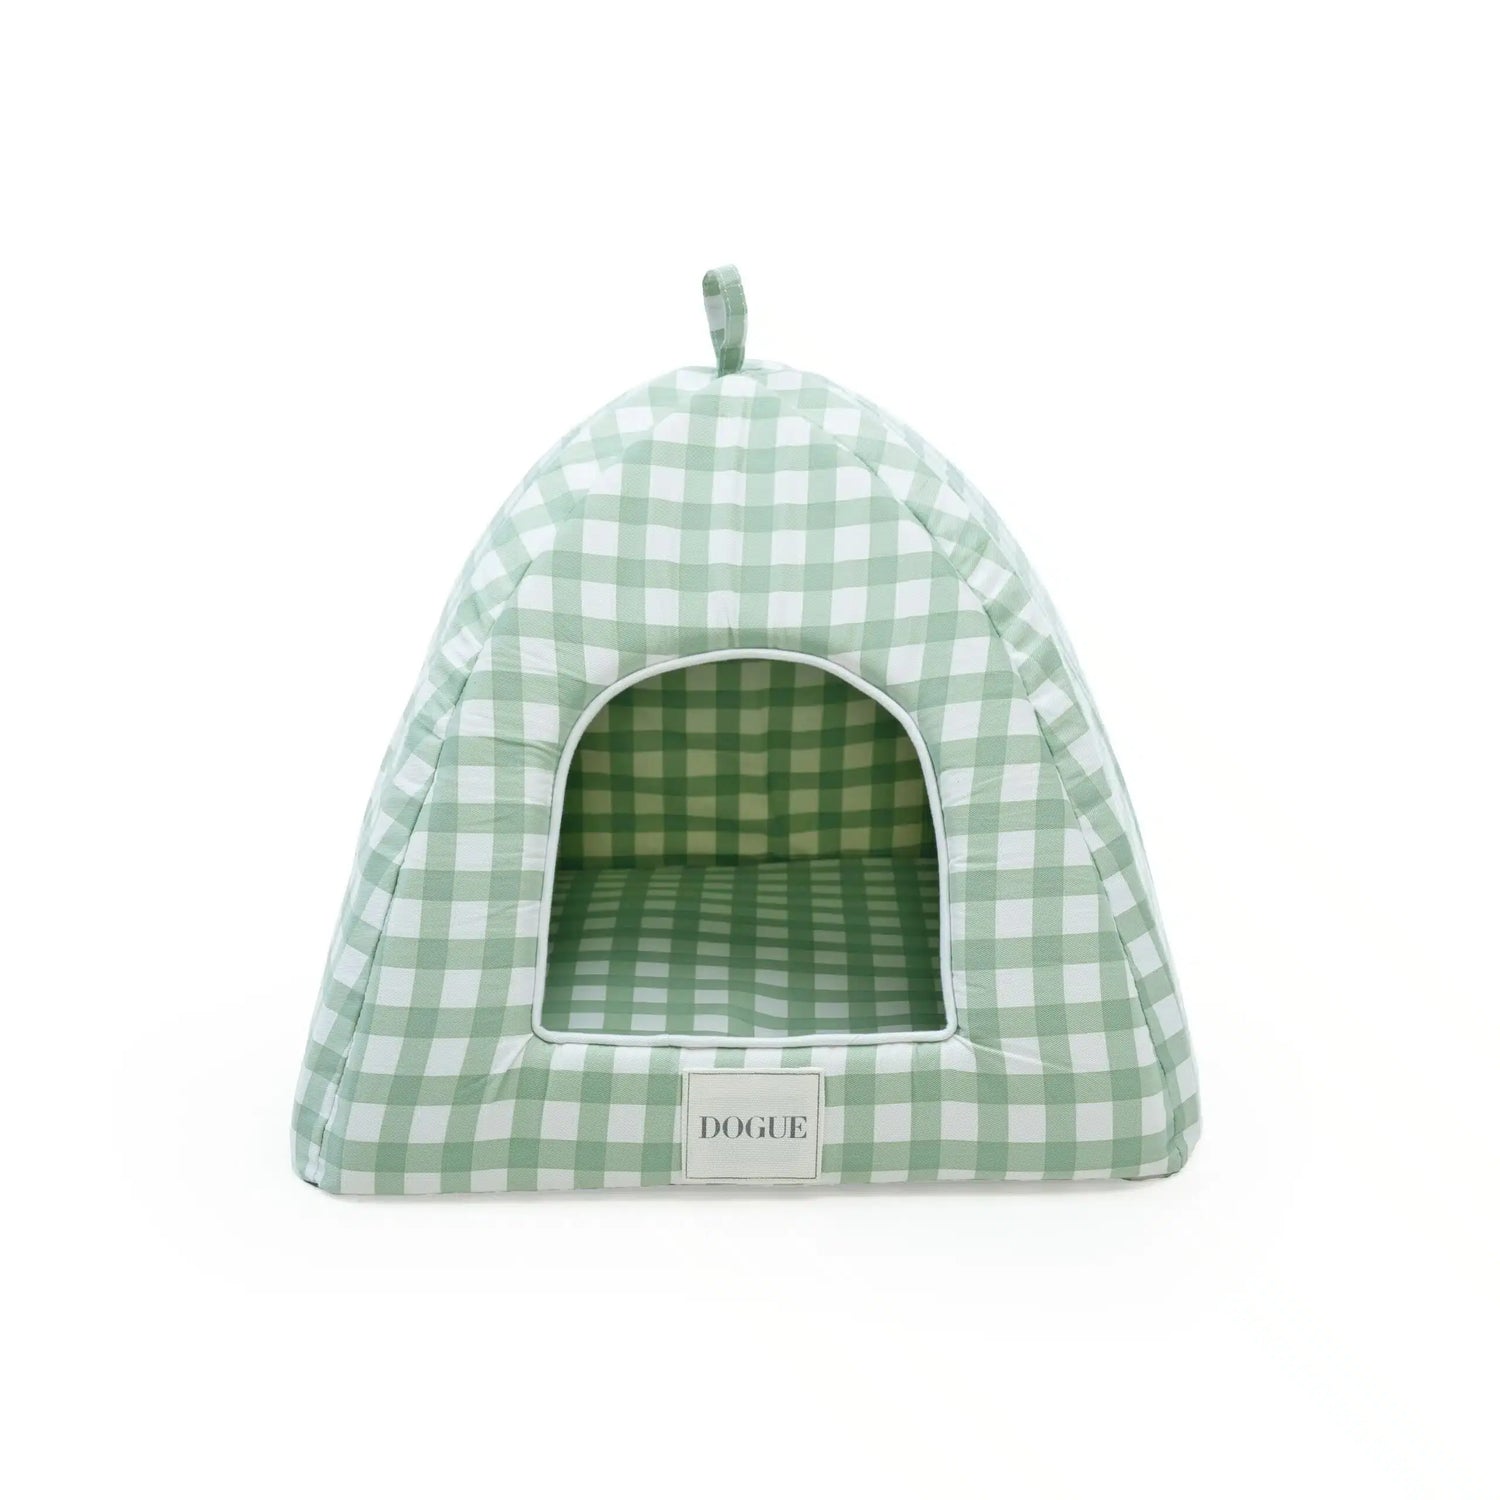 dogue-gingham-green-cat-bed